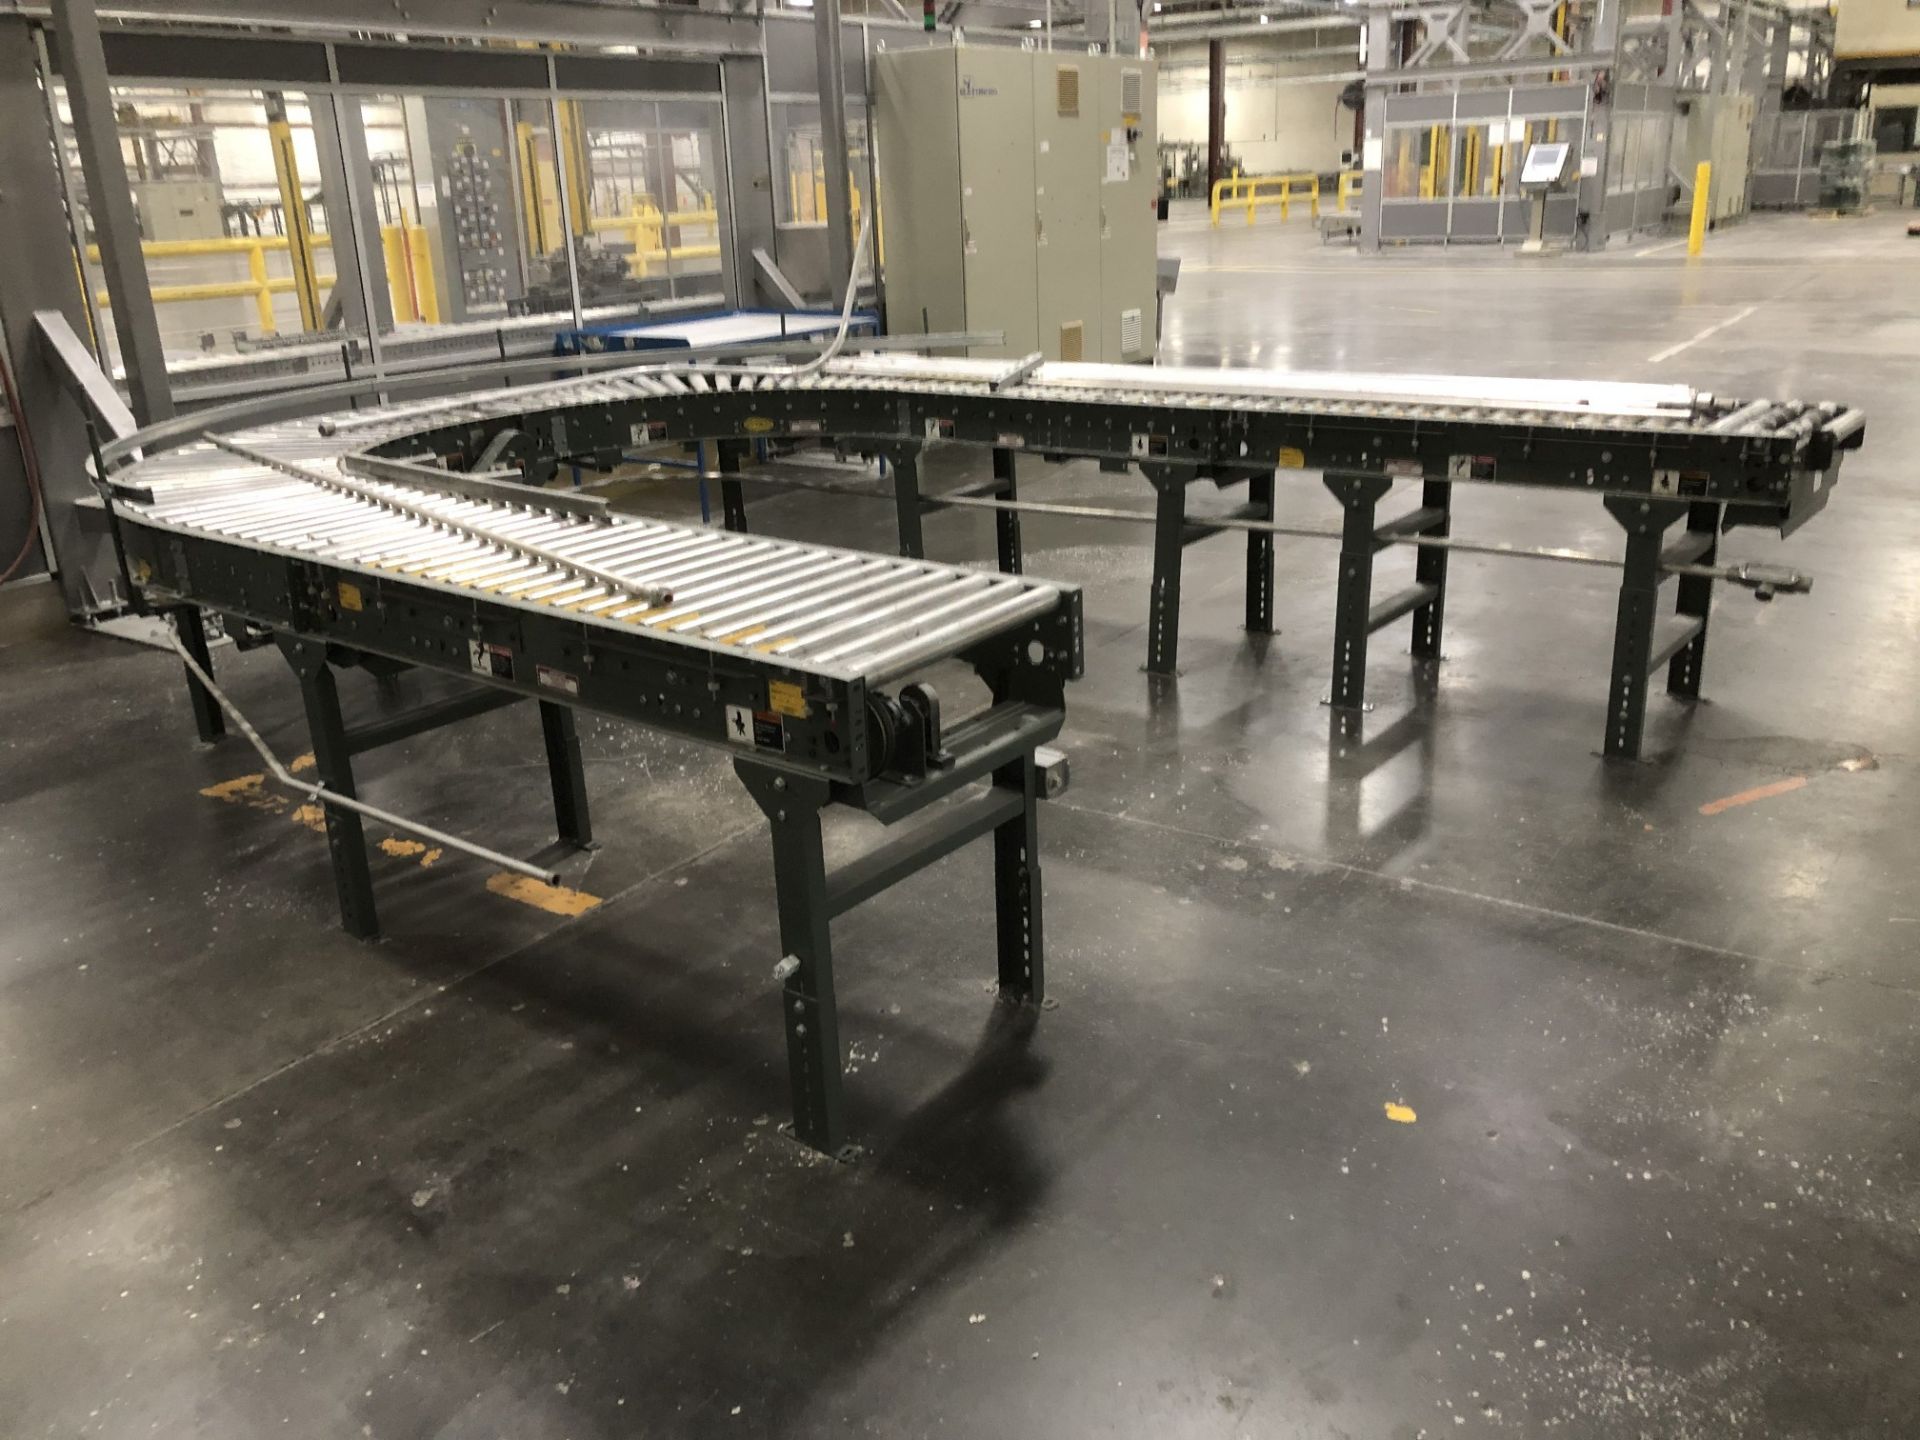 All Hytrol Conveyor Throughout Entire Site, Mostly 20" Wide Powered Roller Conveyor [Please - Image 32 of 80